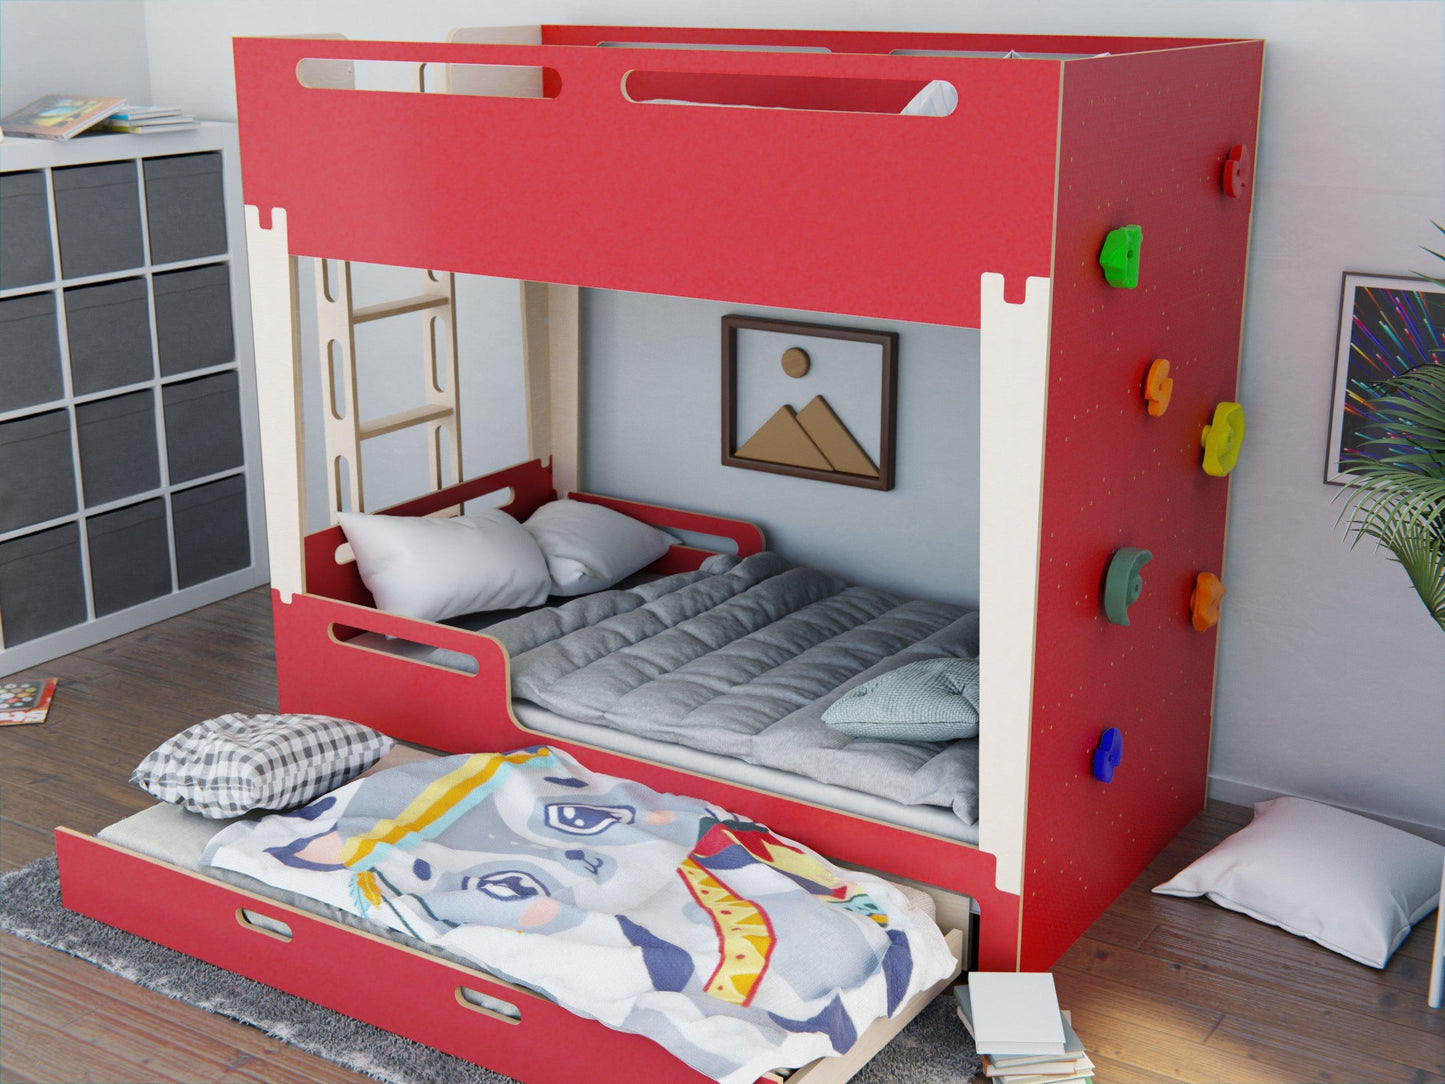 Red Bunk bed with trundle bed and rock climbing wall.